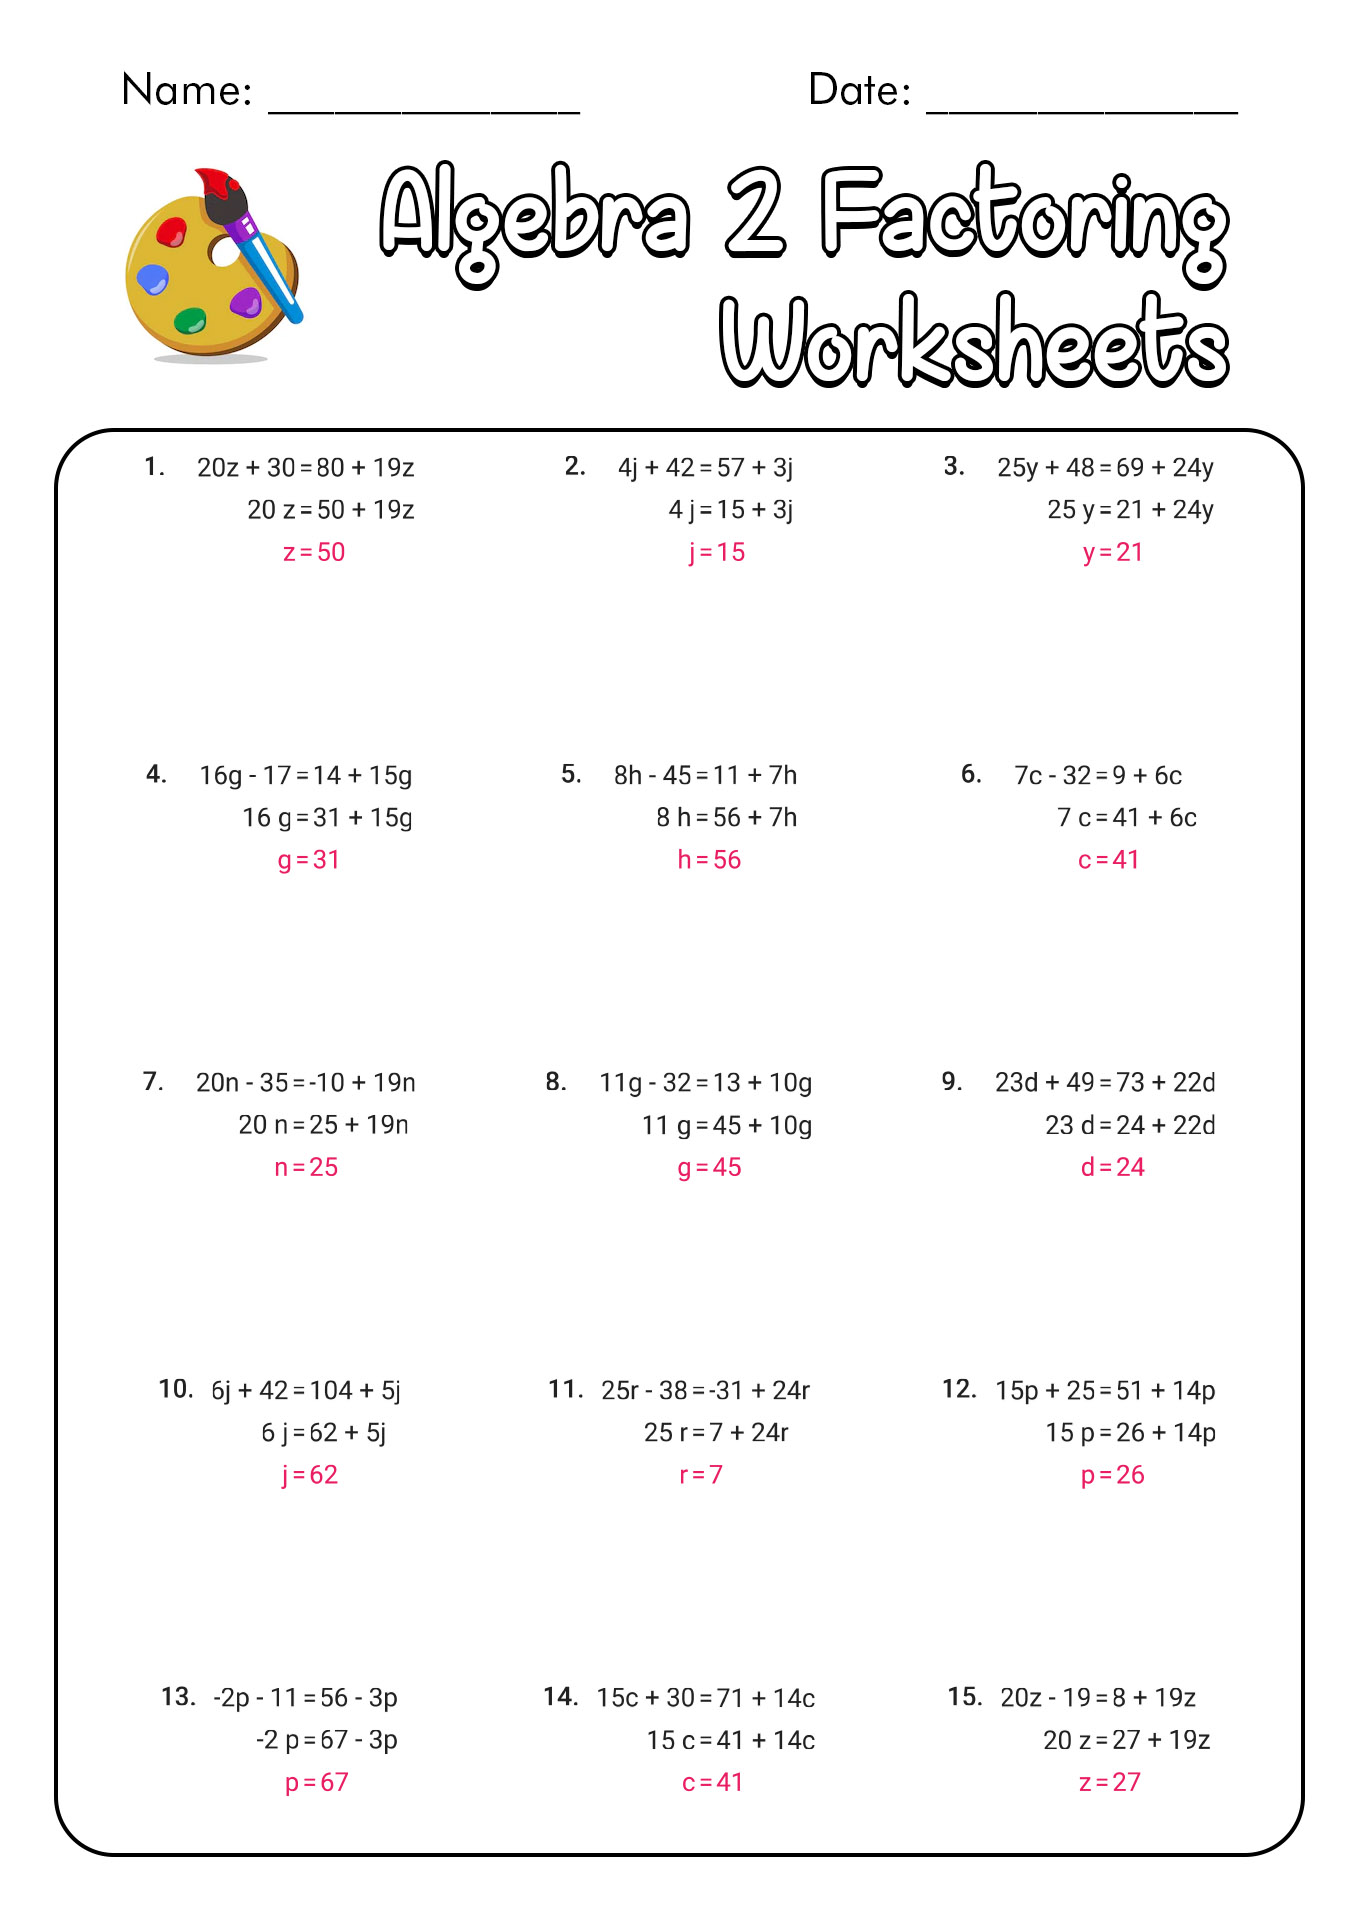 Algebra 2 Factoring Worksheets with Answers